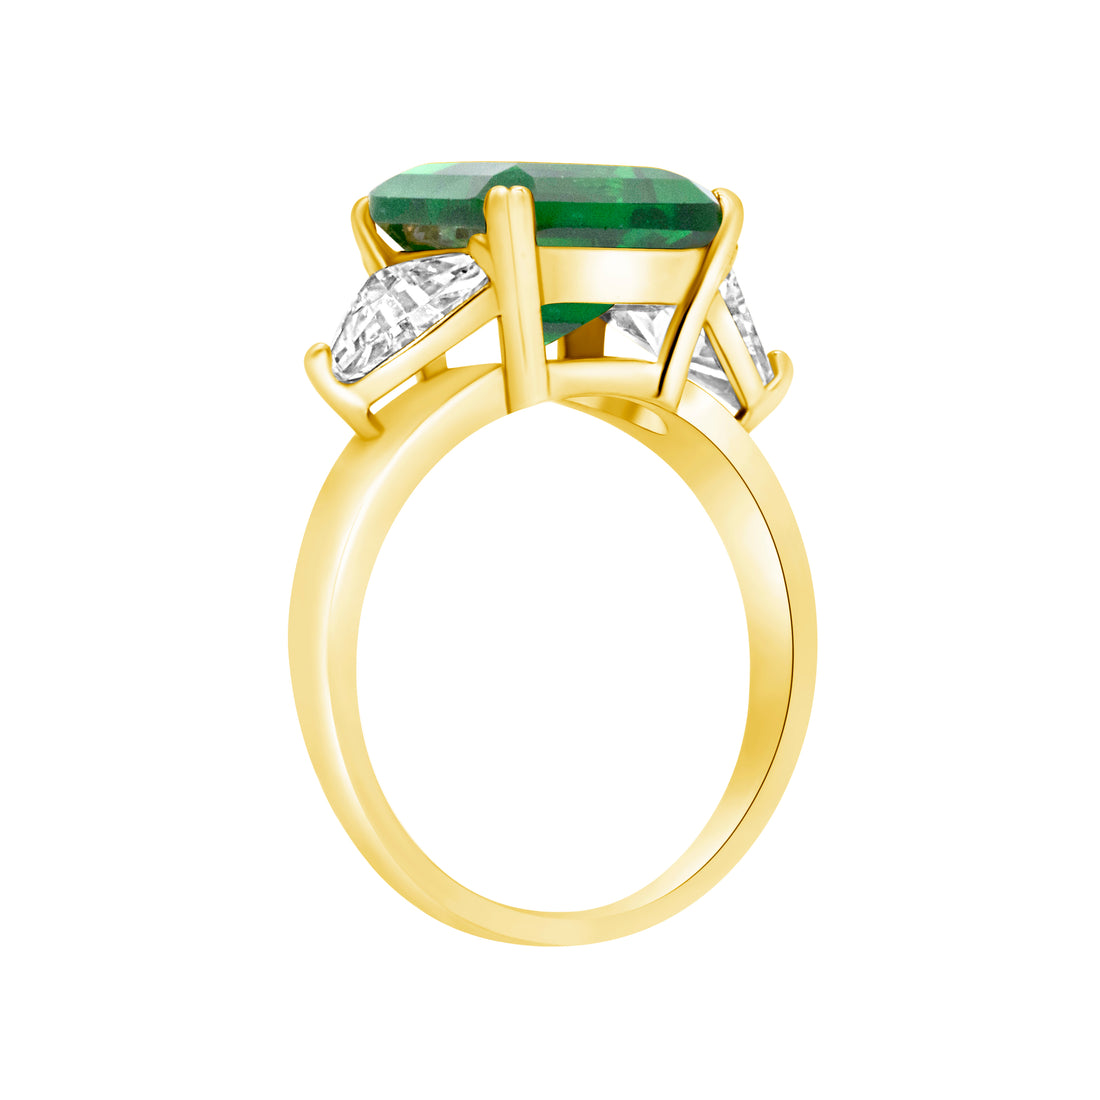 Silver, Gold Plated with Green Zircon Ring